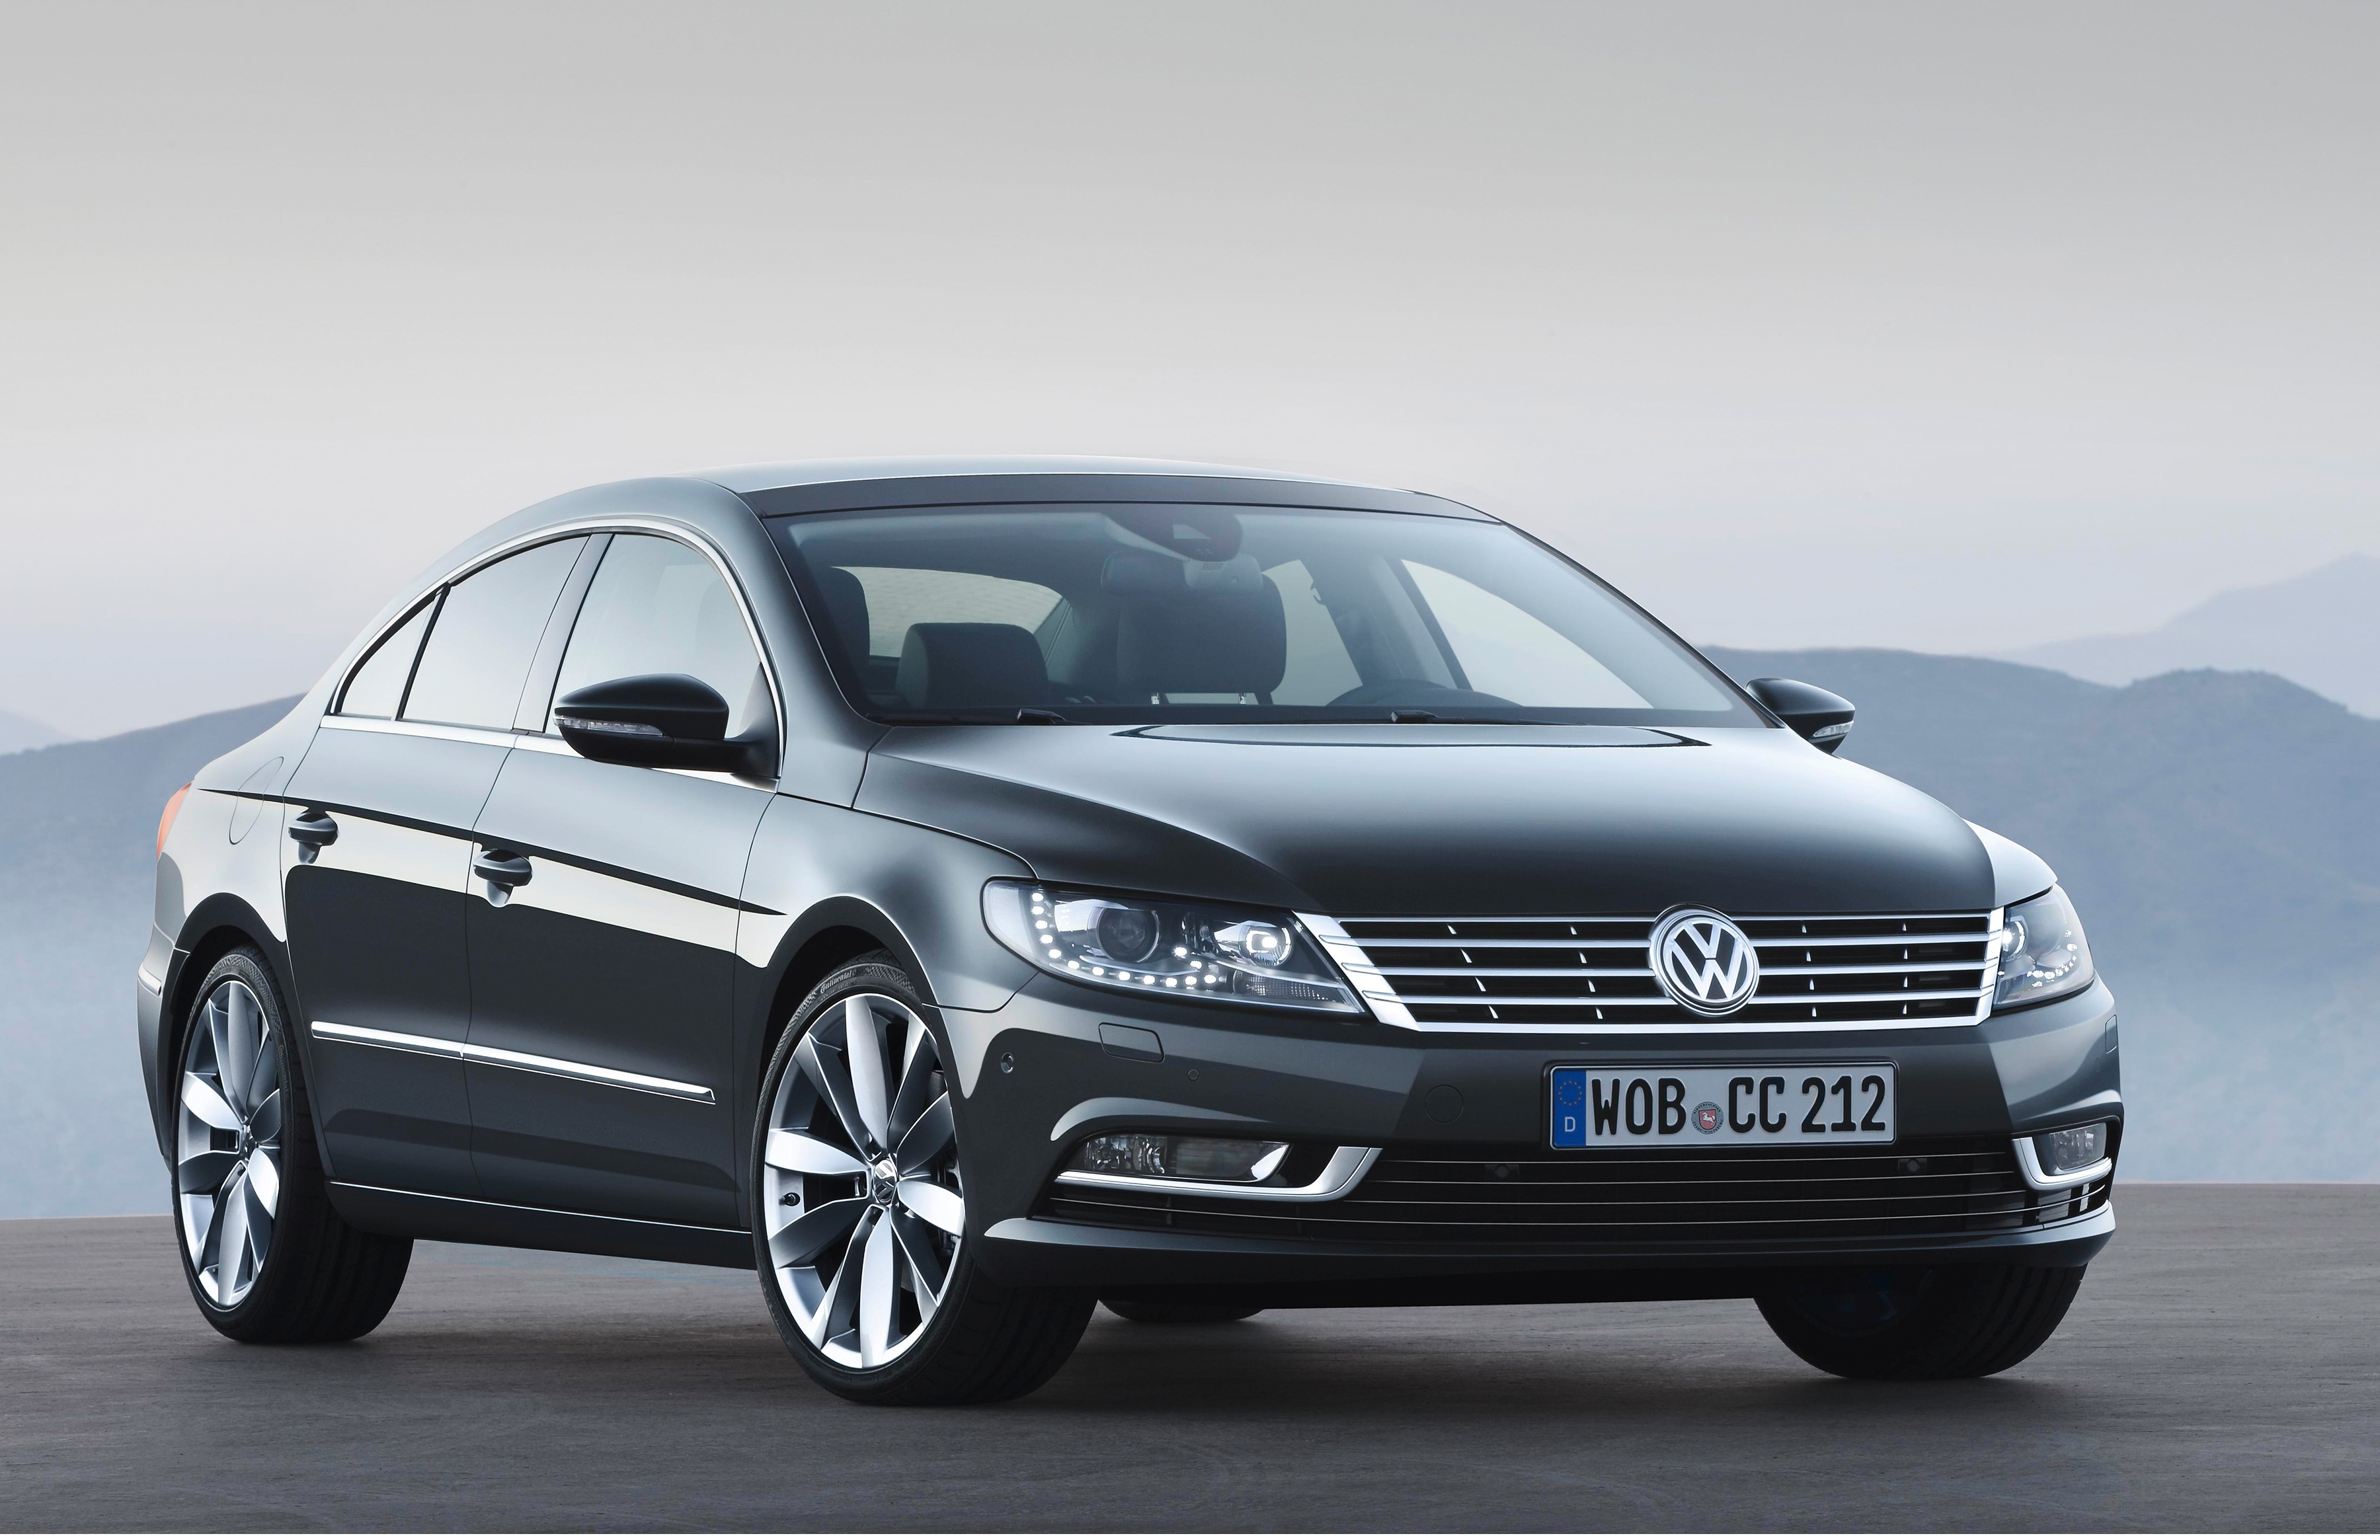 The Volkswagen Cc Malaysian Specifications Revealed